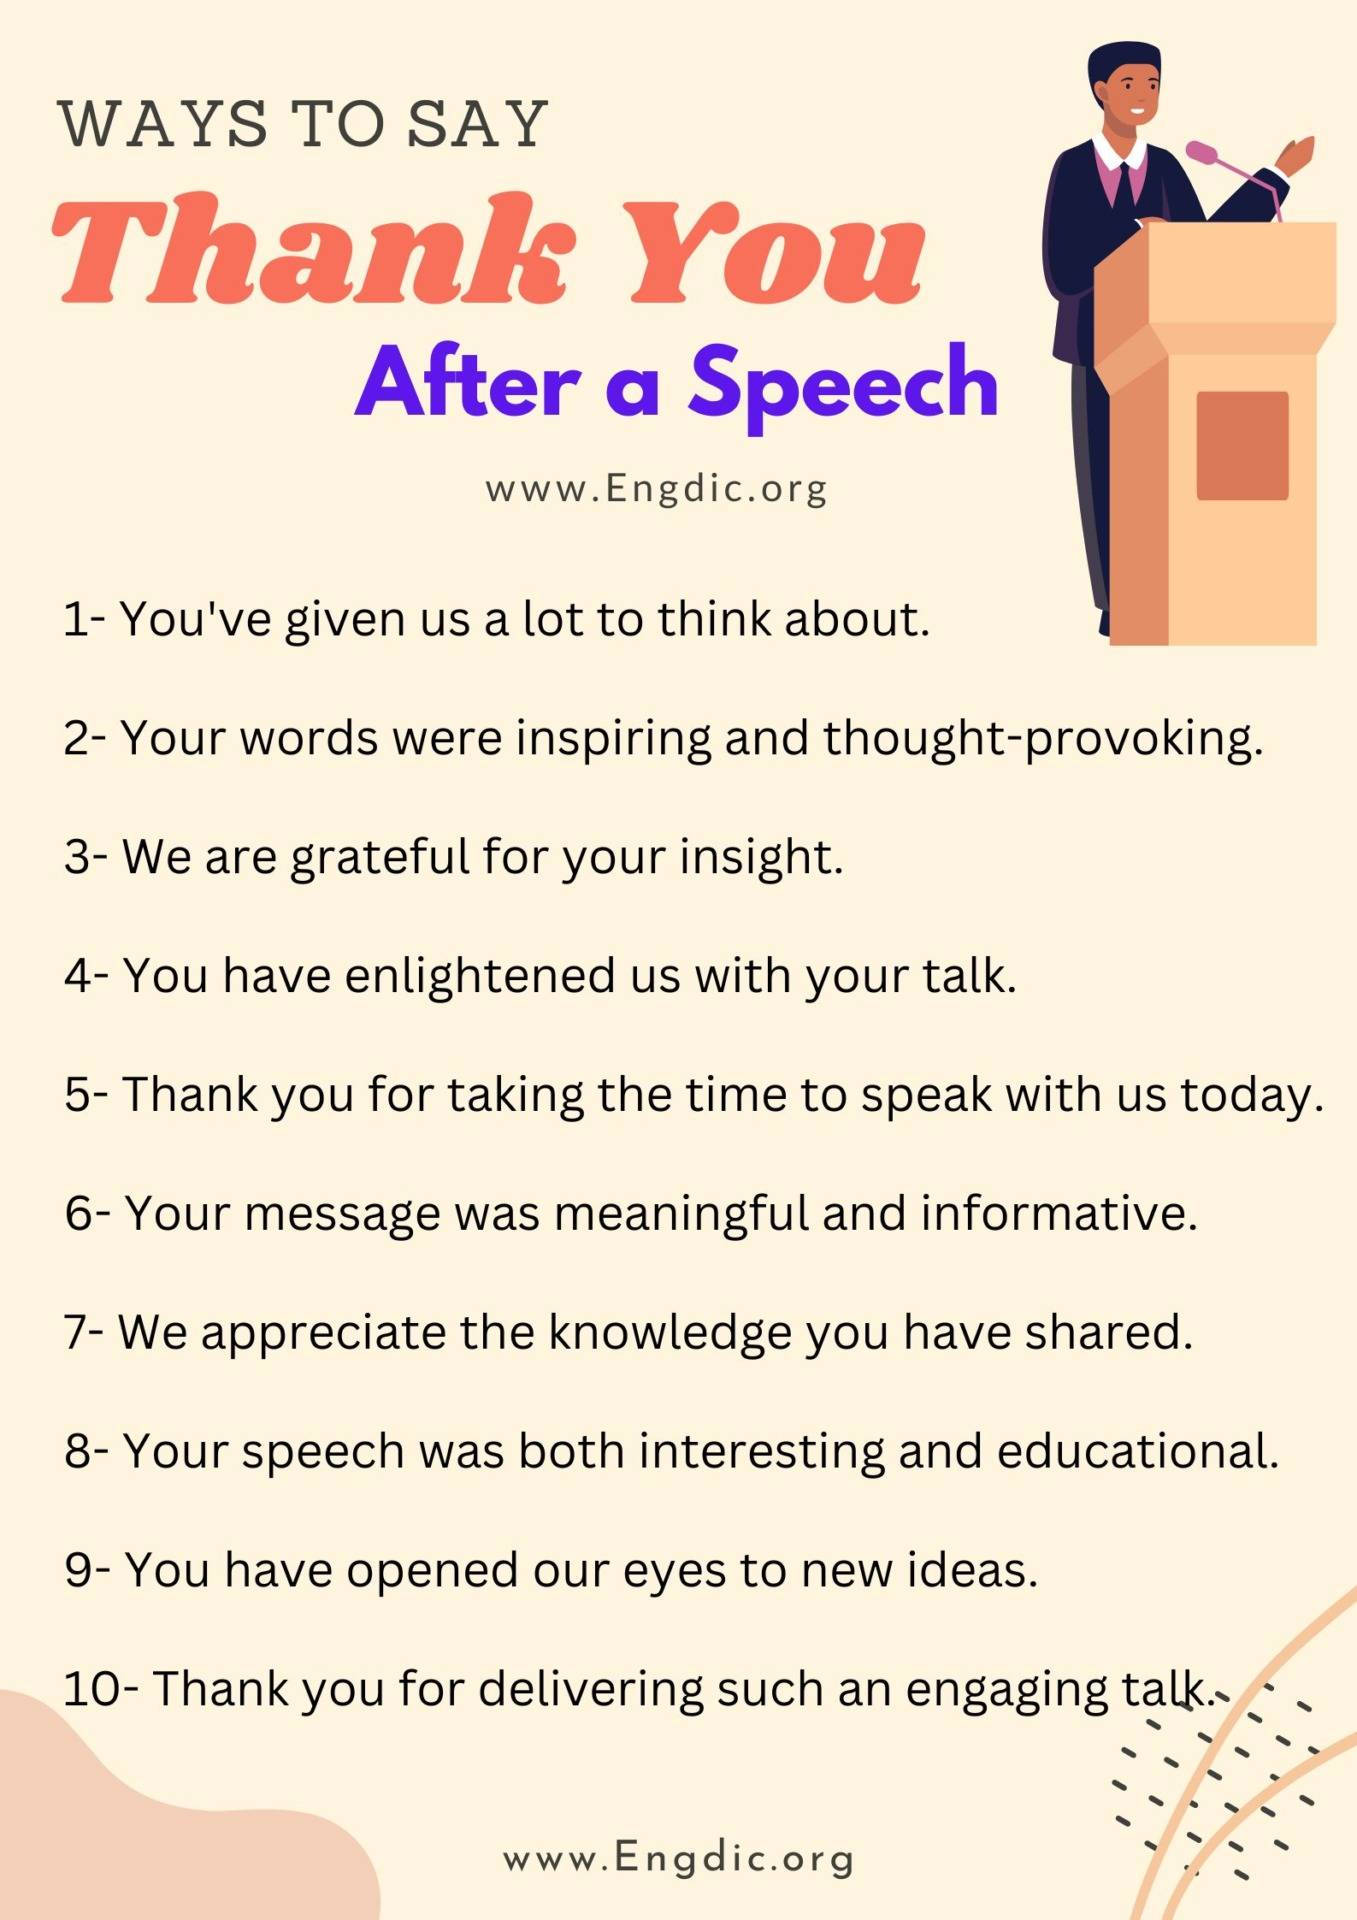 Ways to say thank you After a Speech